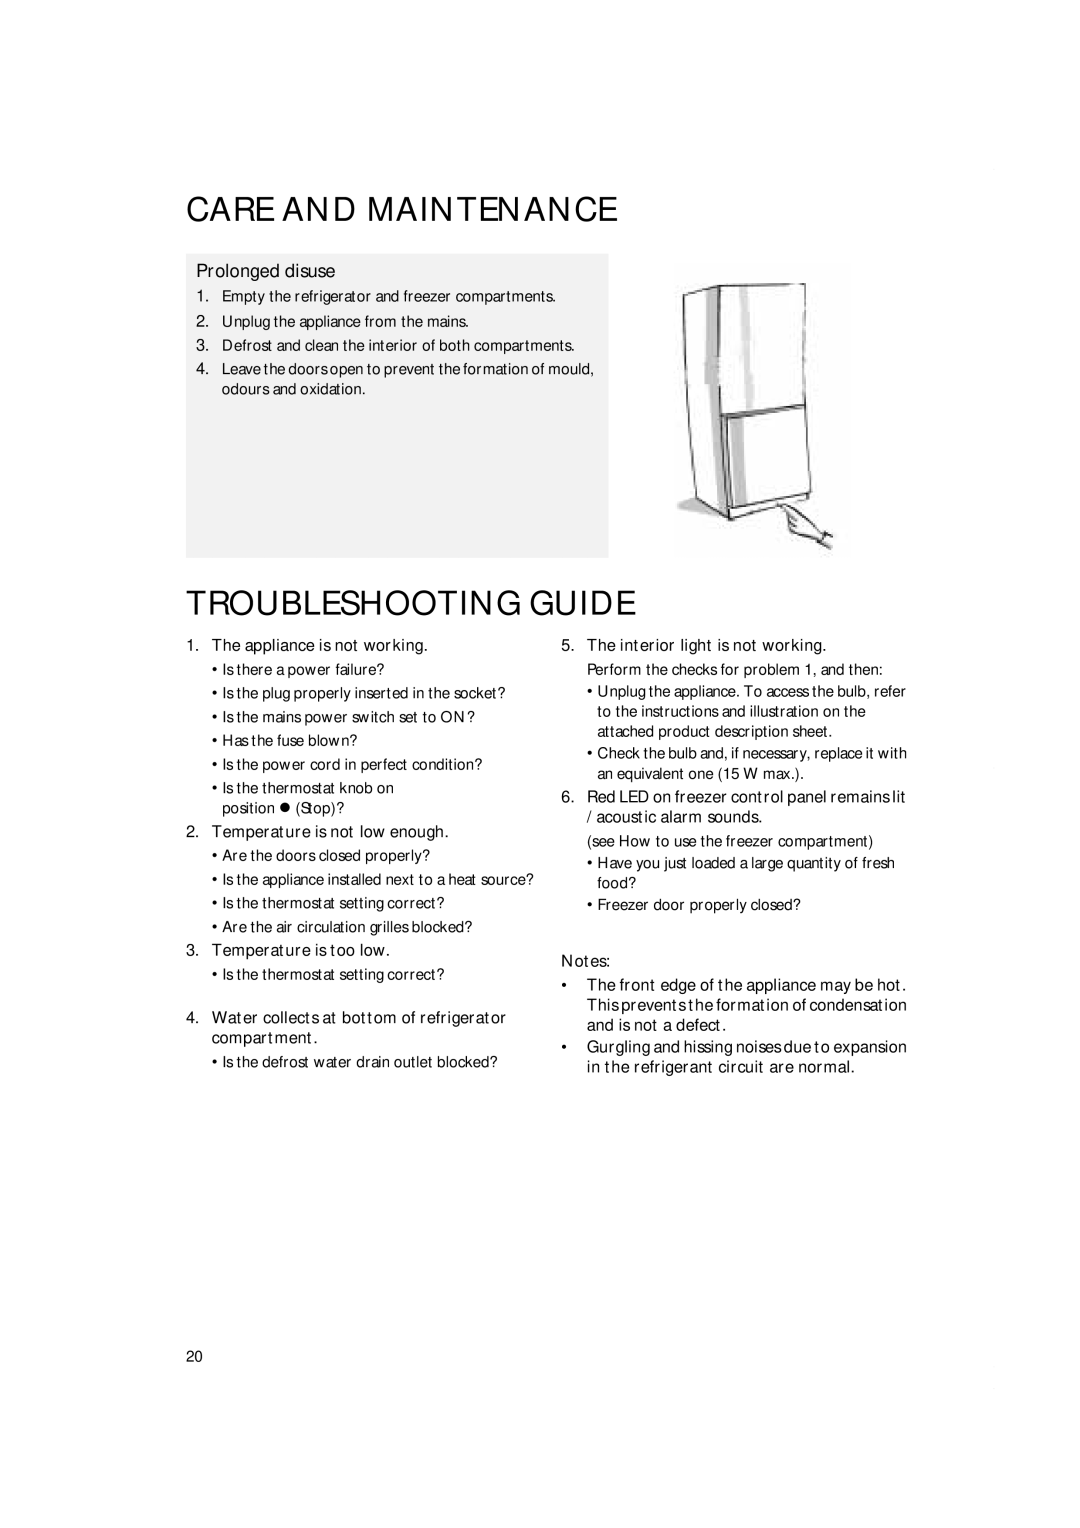 Smeg CR5050A manual Care And Maintenance, Troubleshooting Guide, Prolonged disuse, The appliance is not working 